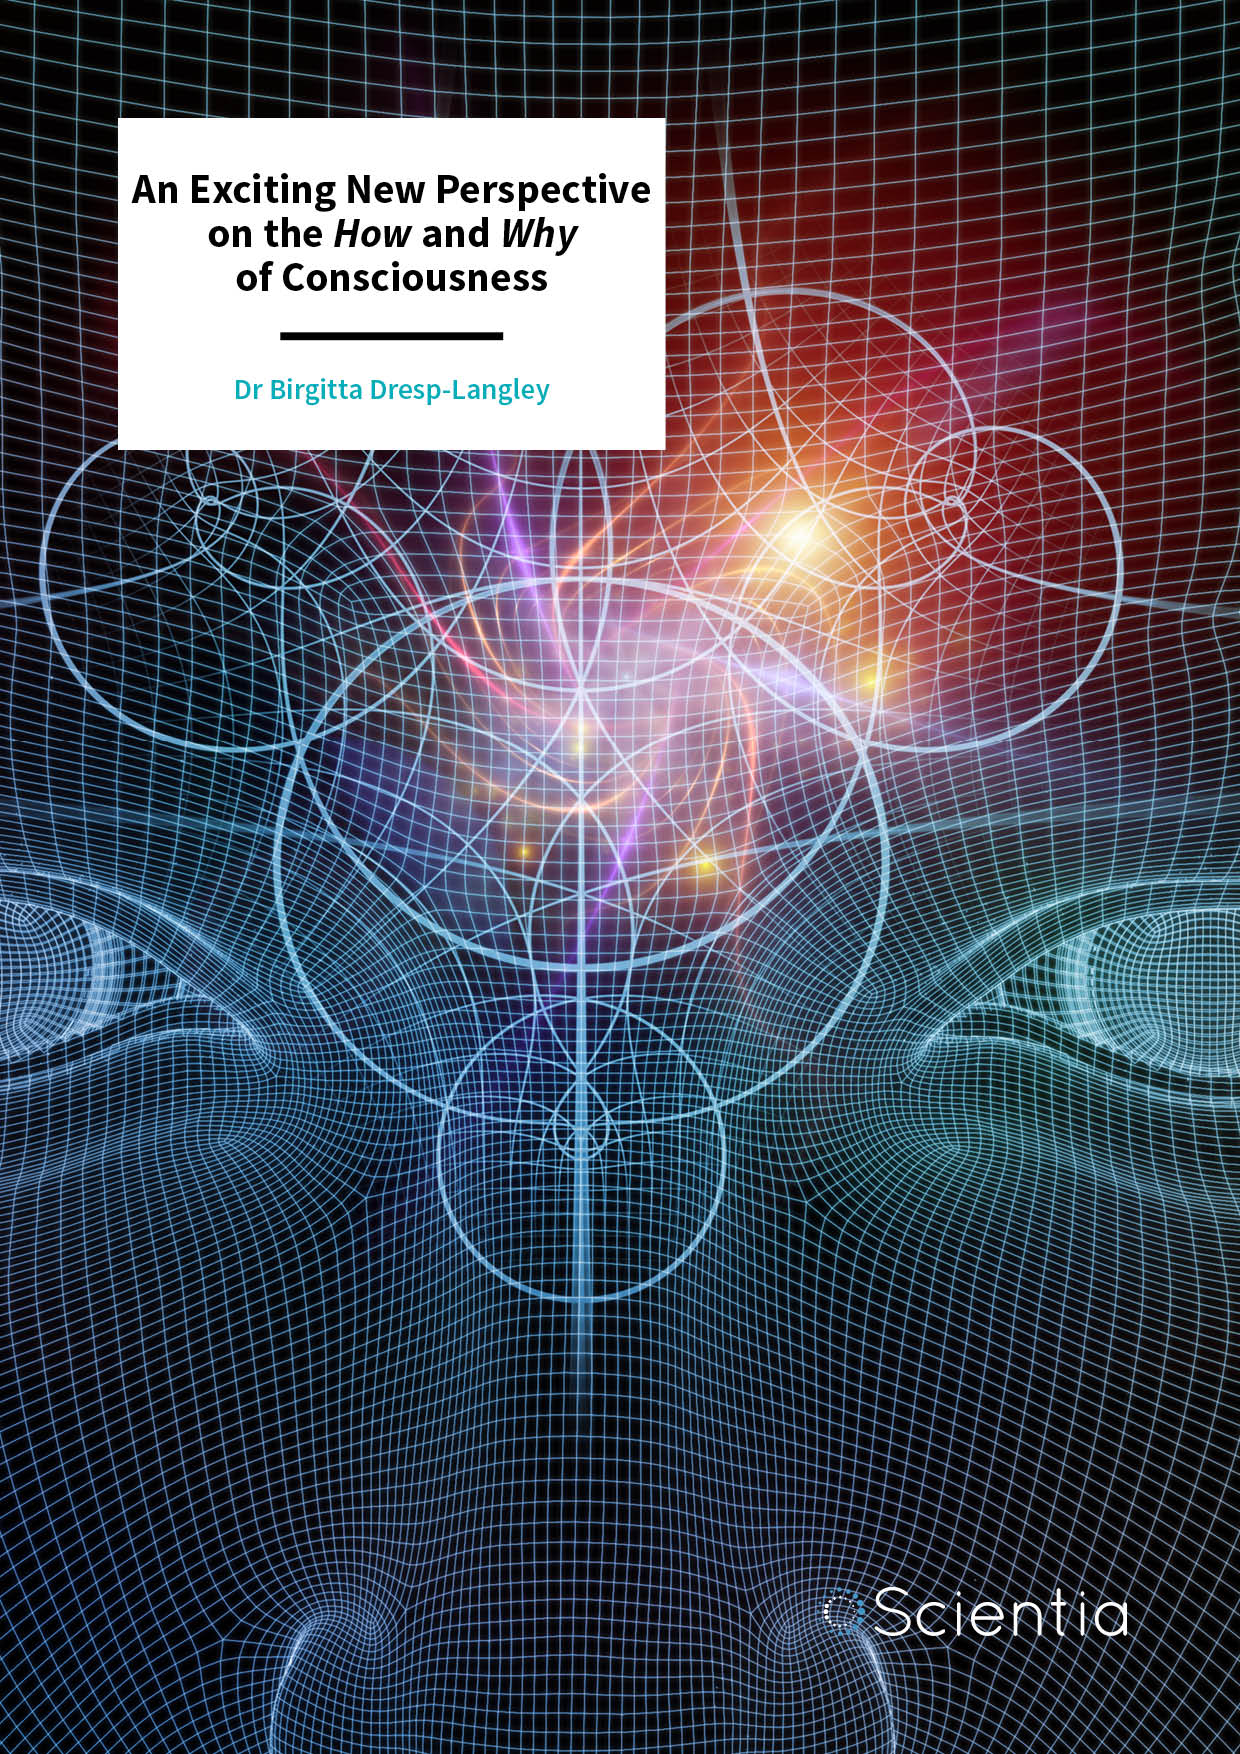 Dr Birgitta Dresp-Langley | An Exciting New Perspective on the How and Why of Consciousness